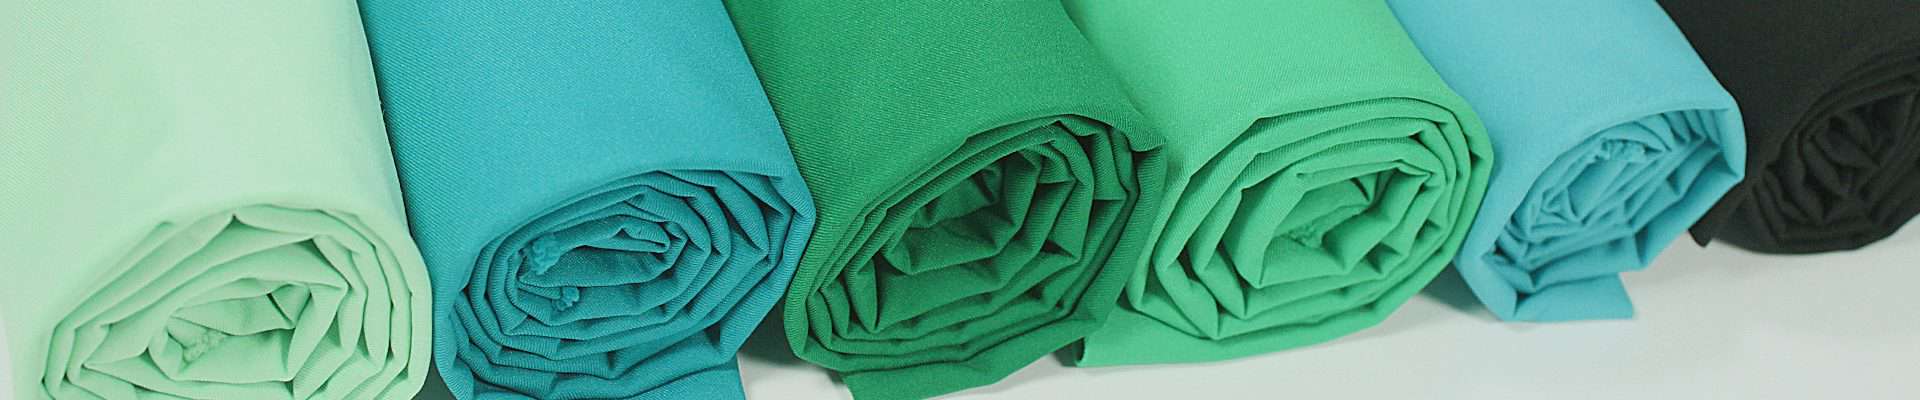 Athletic stretch solid fabric Manufacturers - China Athletic stretch solid  fabric Factory & Suppliers